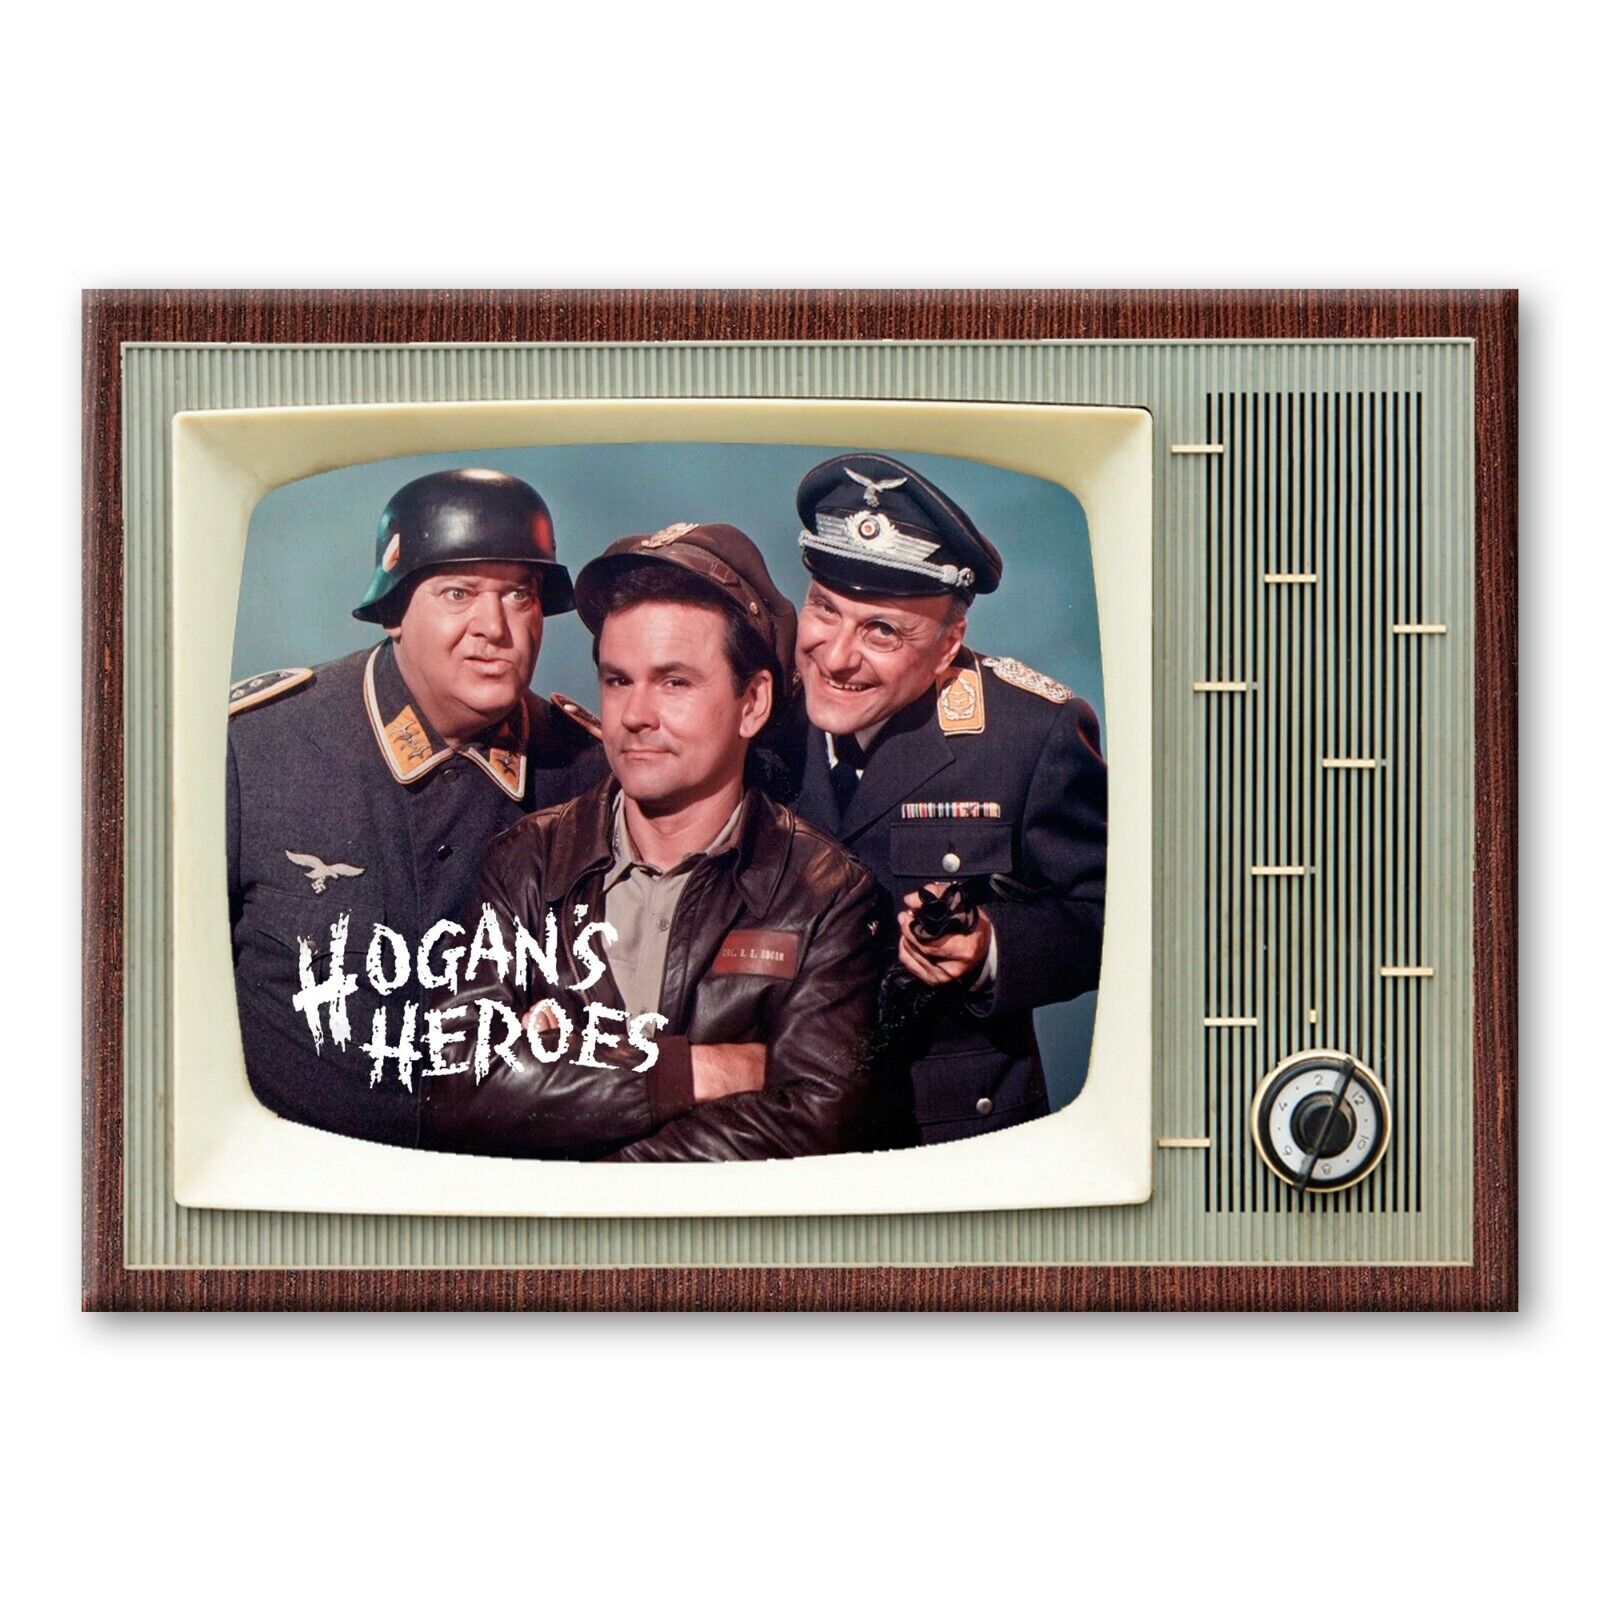 HOGANS HEROES TV Show TV 3.5 inches x 2.5 inches Steel FRIDGE MAGNET